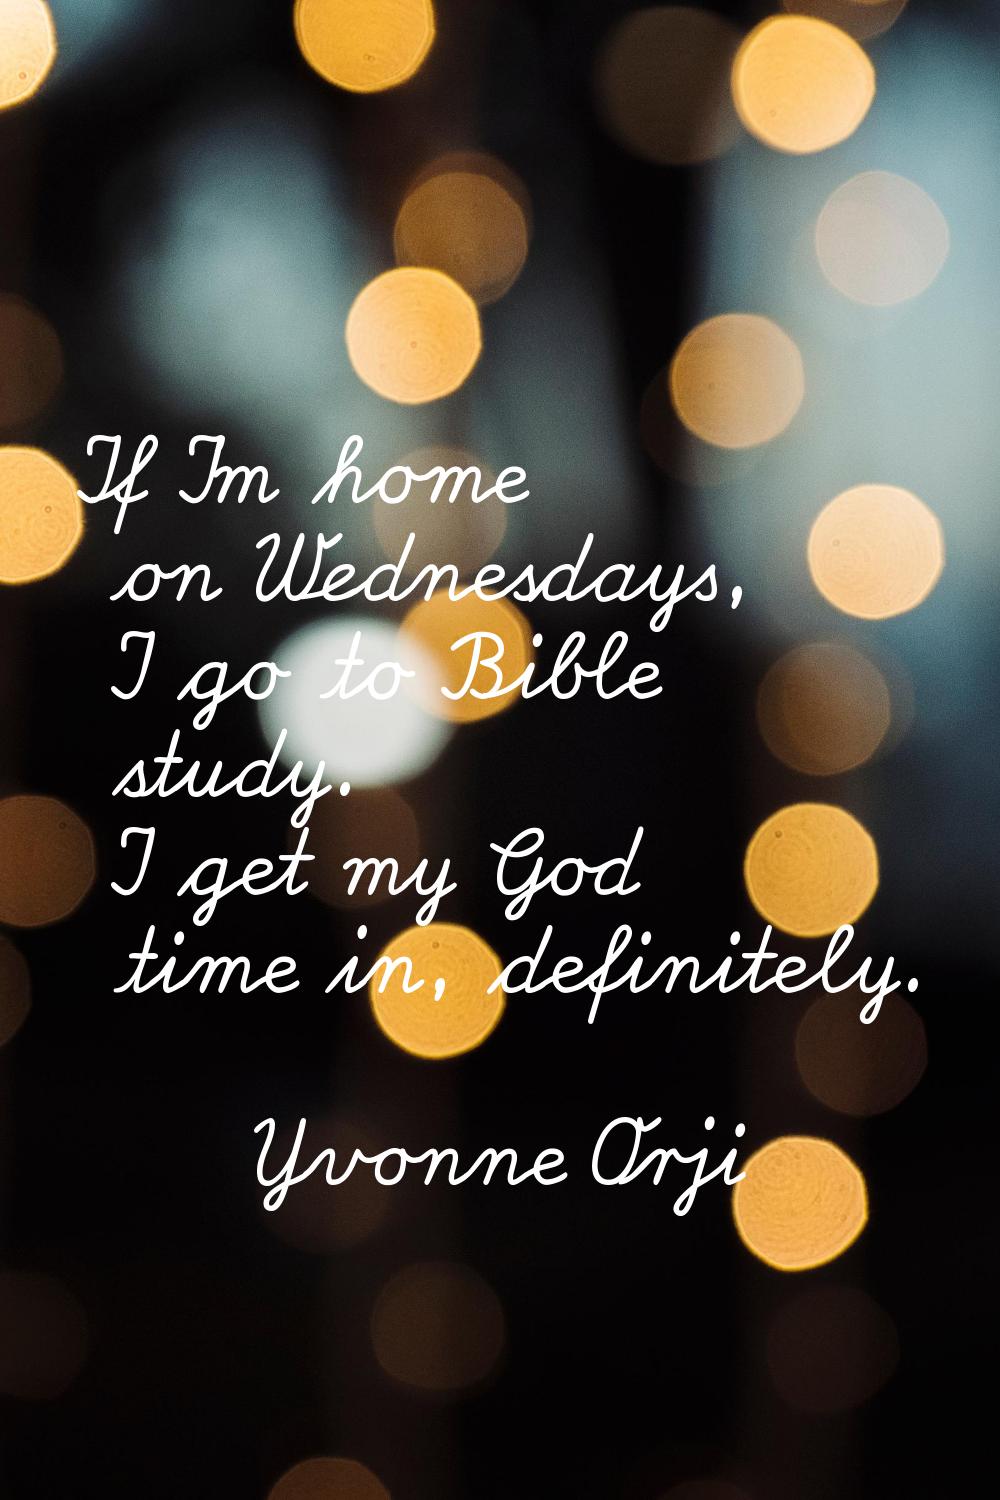 If I'm home on Wednesdays, I go to Bible study. I get my God time in, definitely.